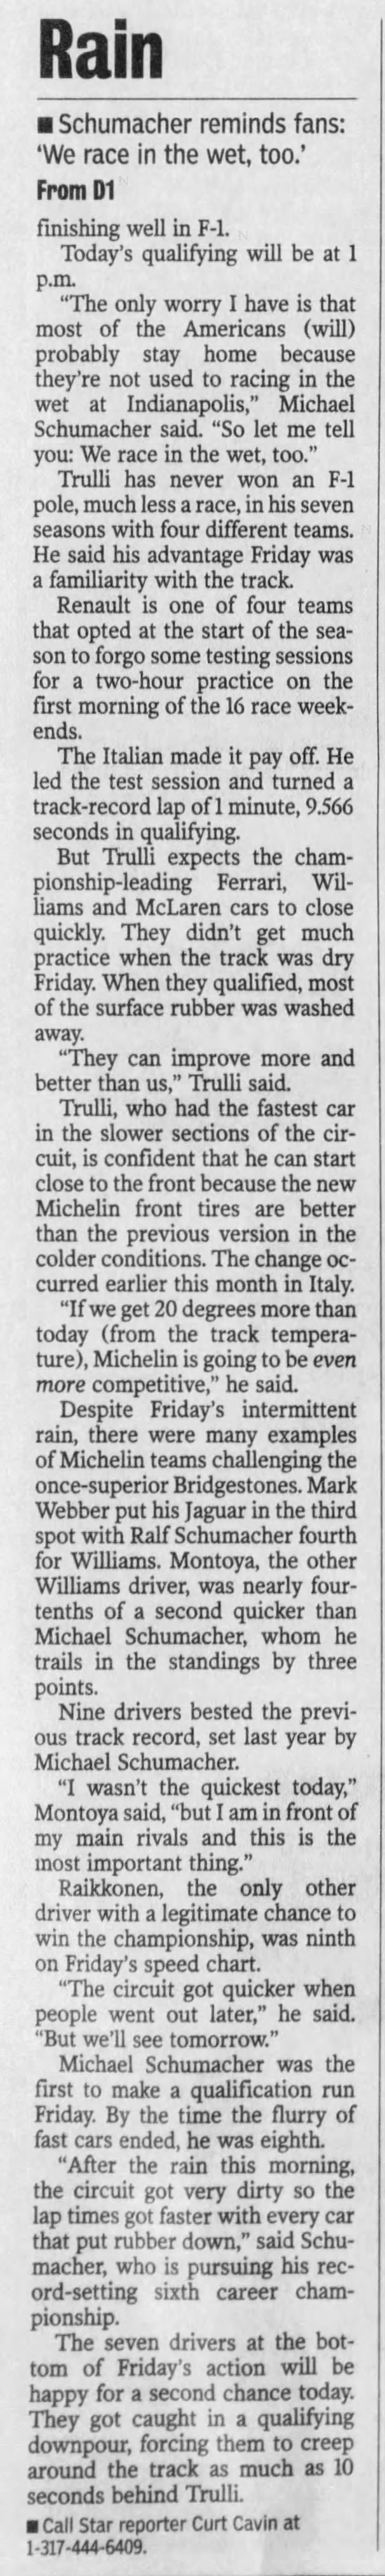 Contenders trail behind in the rain - The Indianapolis Star - 27 September 2003 - Page D1